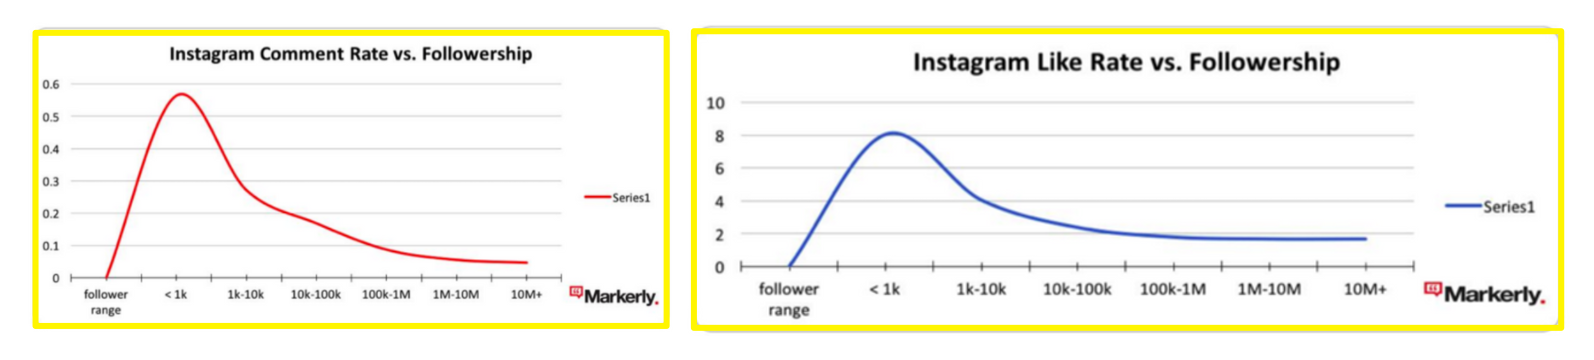 Screenshot showing graphs about instagram comment/like rates